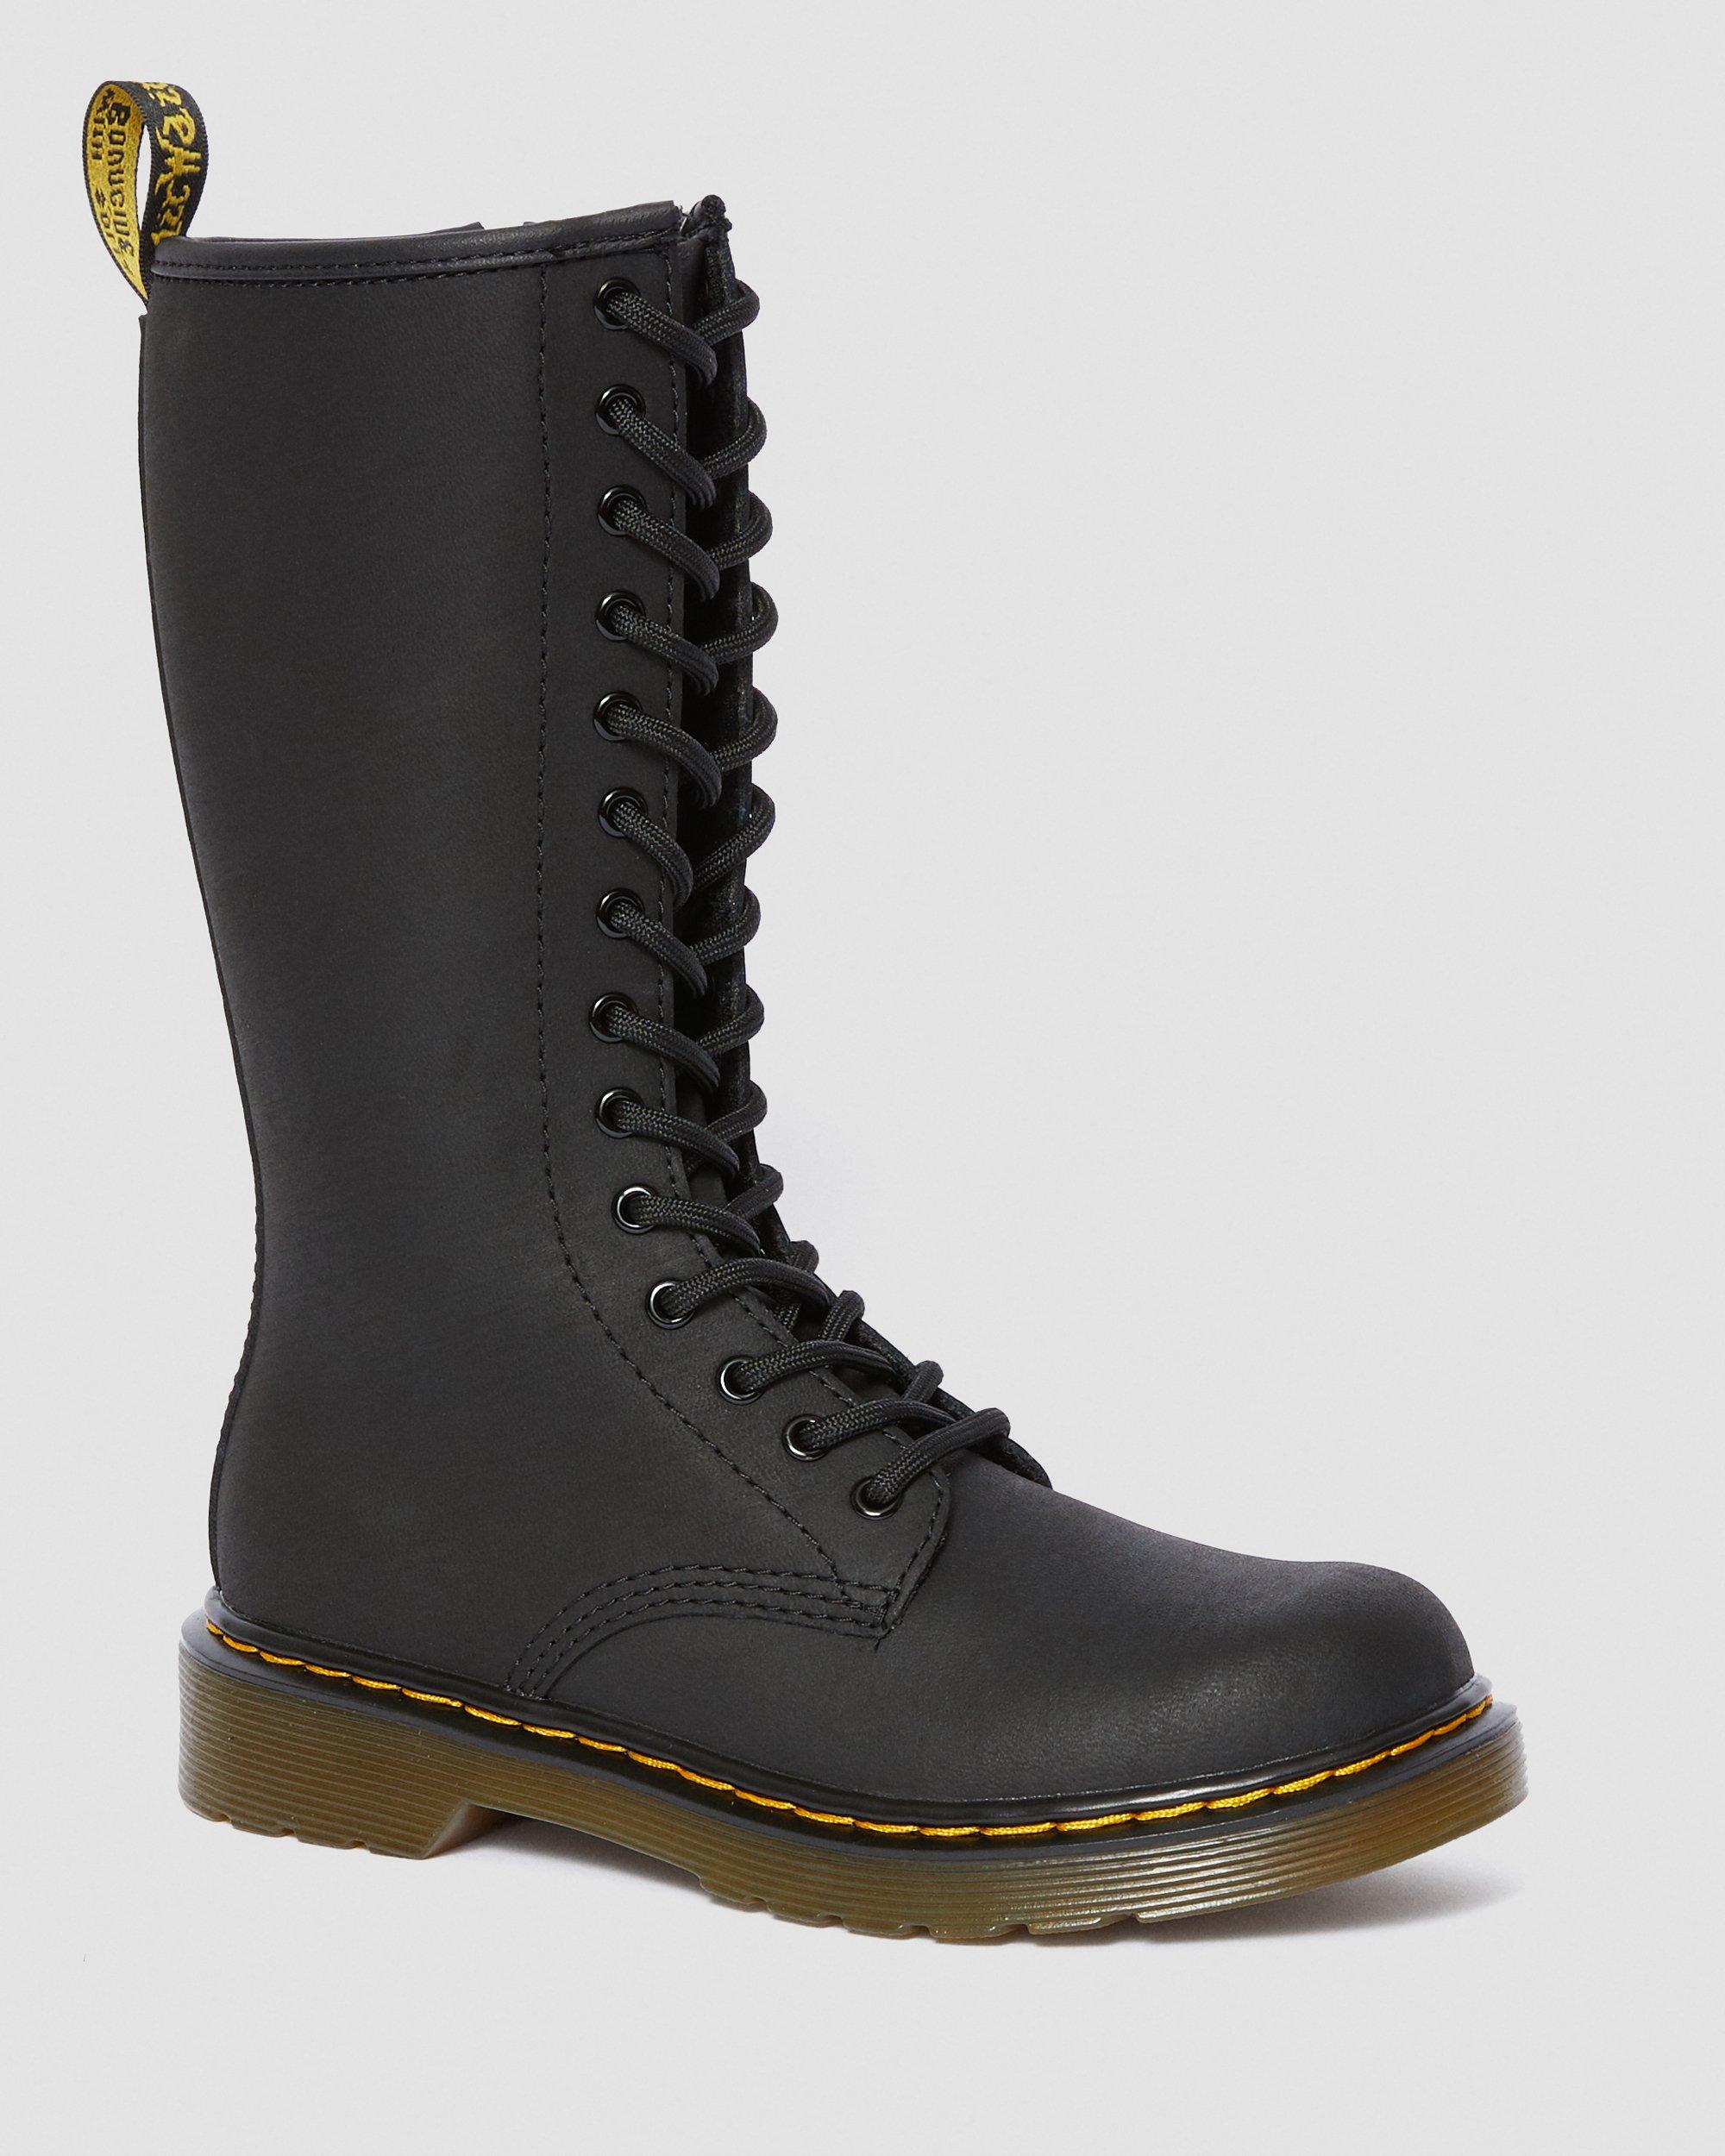 Junior 1914 Leather Tall Boots in Black | Dr. Martens